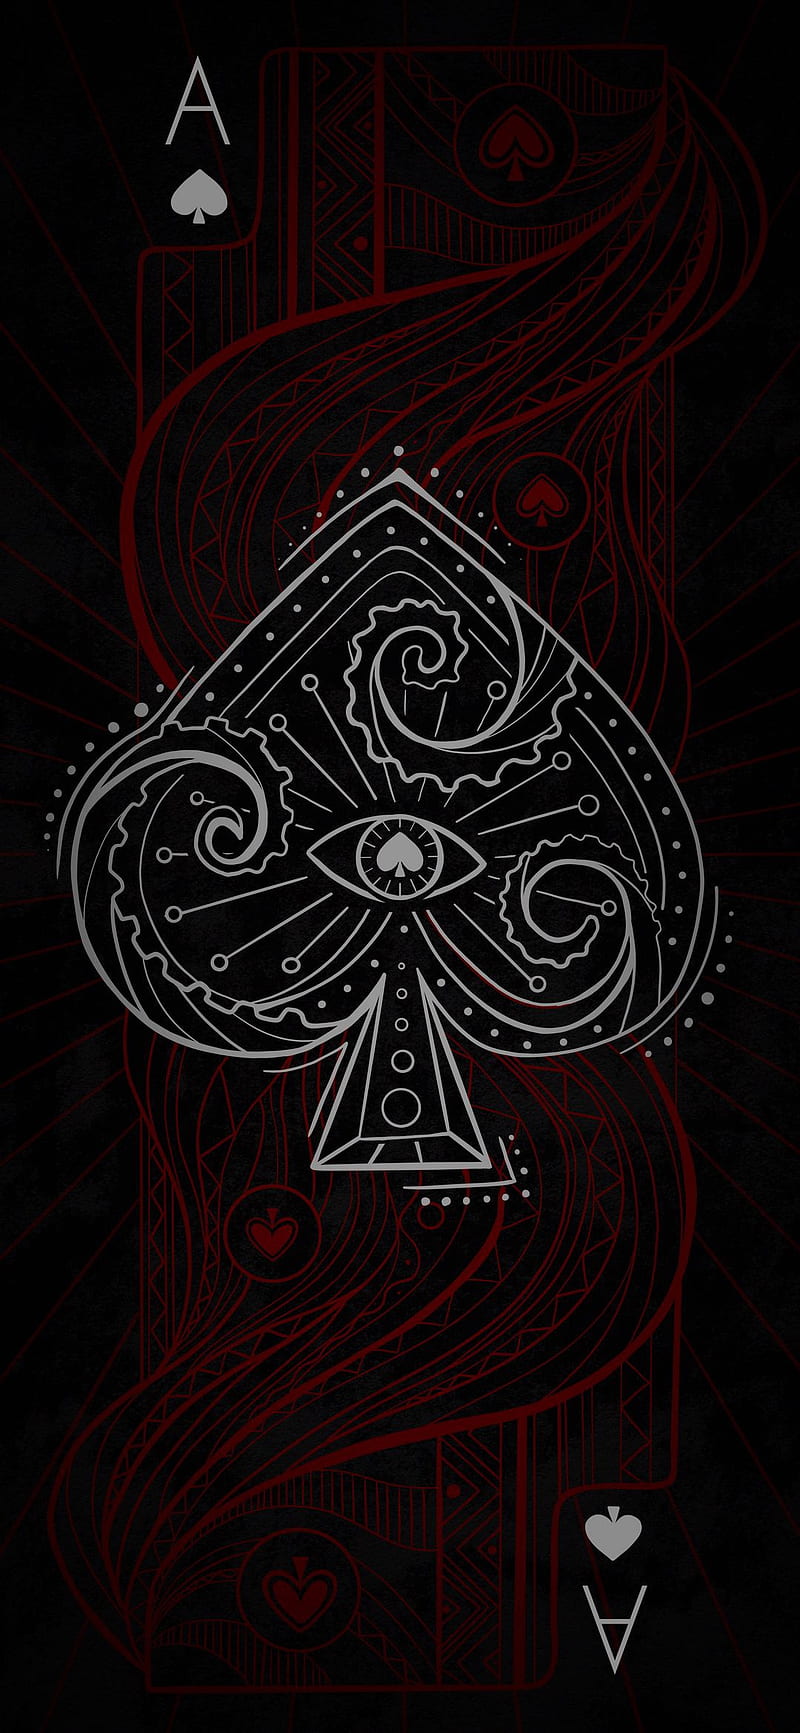 Download wallpaper 800x1200 playing cards cards queen black iphone 4s4  for parallax hd background